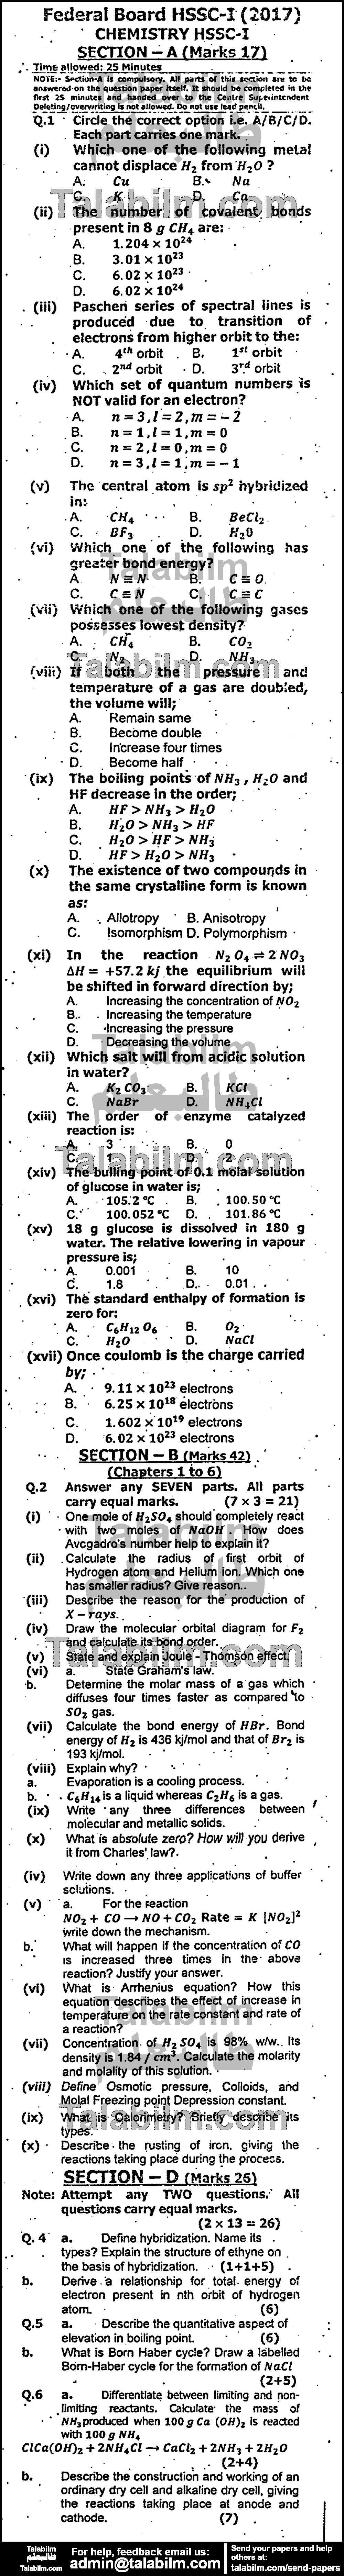 Chemistry 0 past paper for Group-I 2017